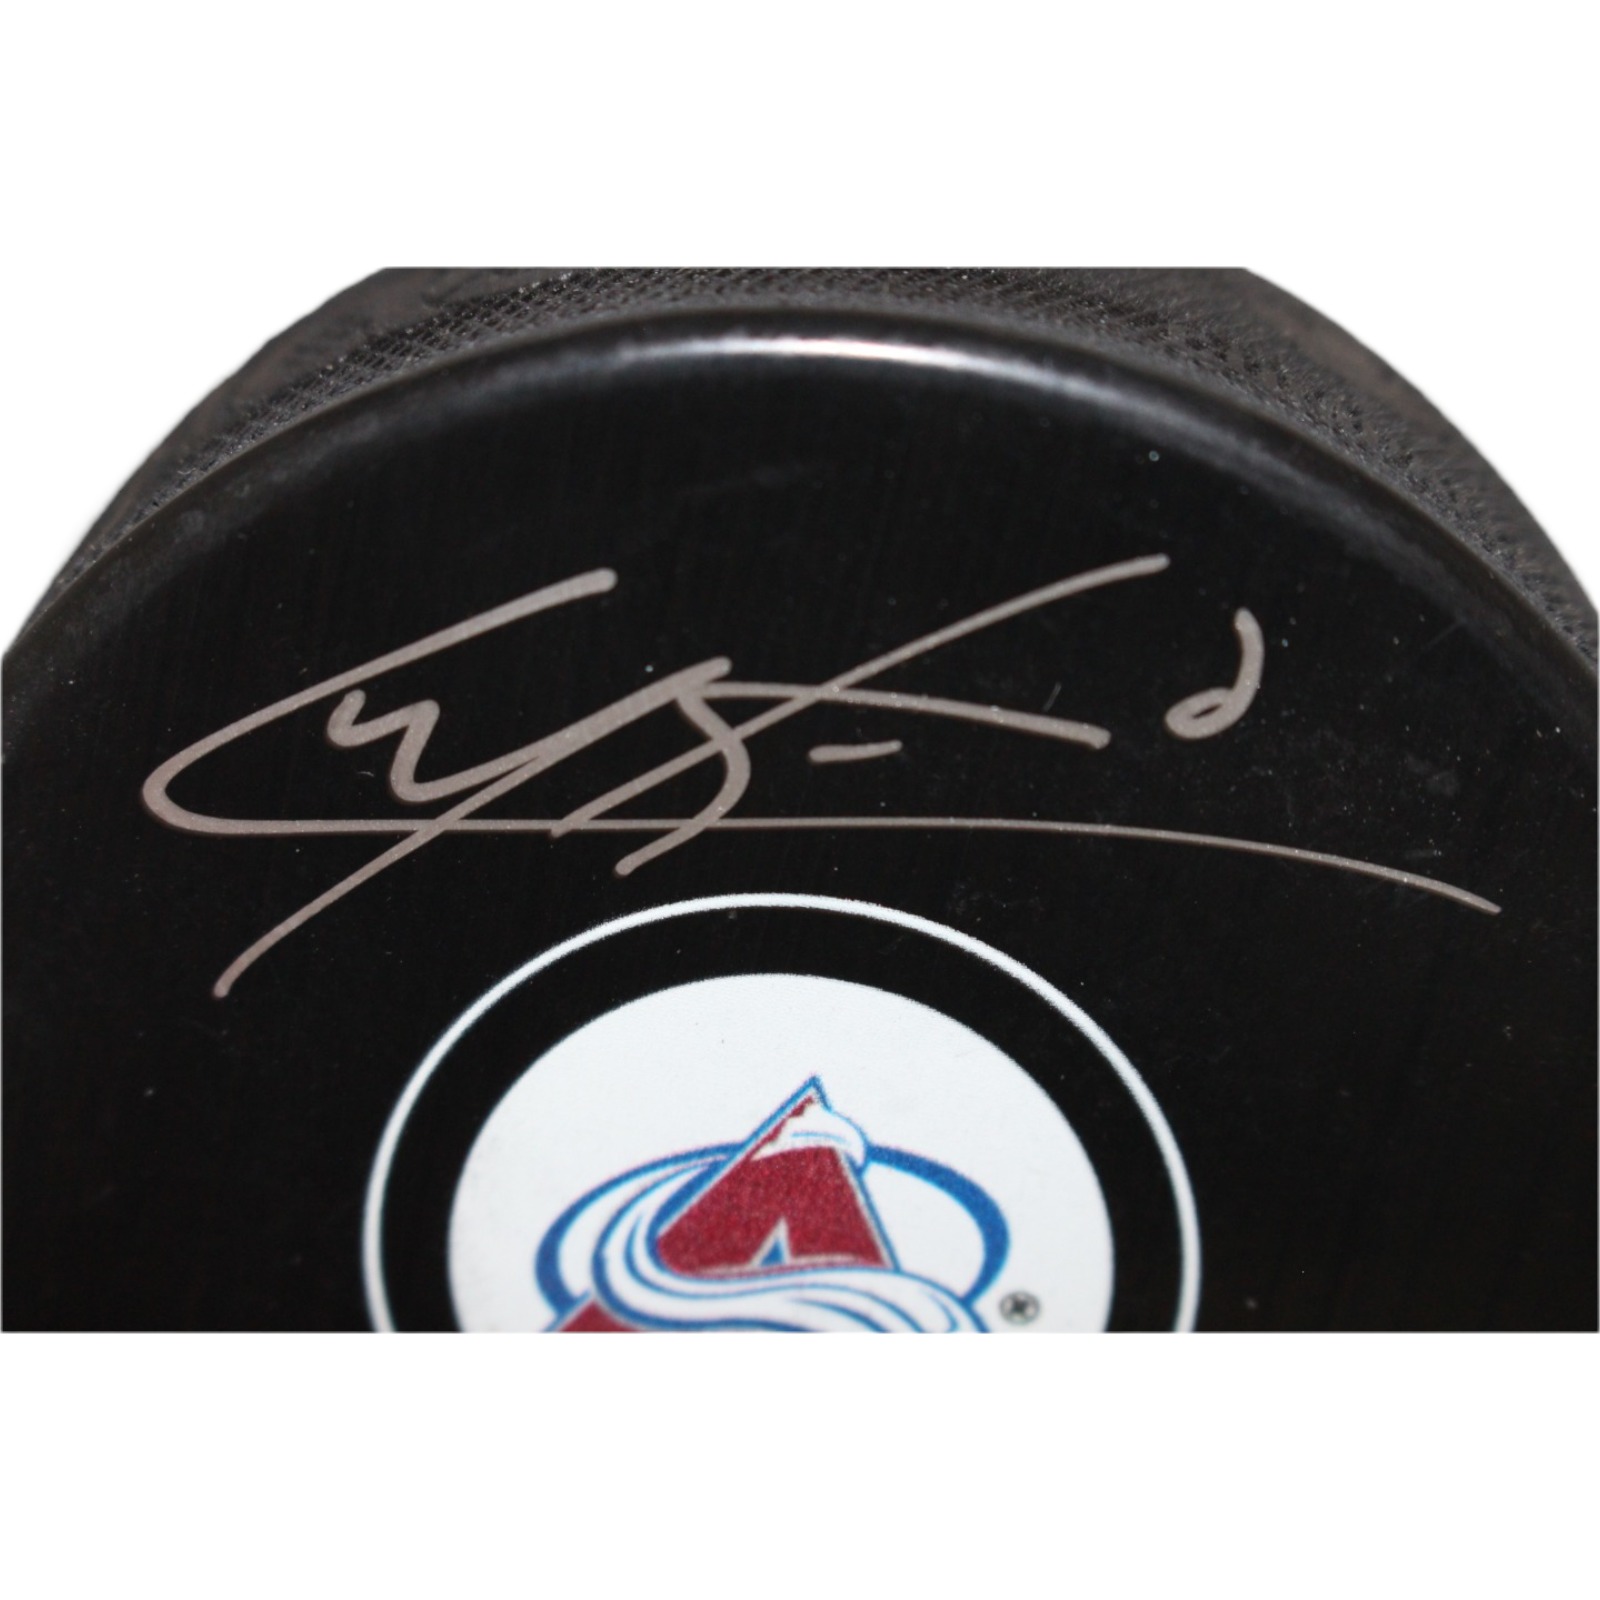 Cale Makar Autographed/Signed Colorado Avalanche Hockey Puck FAN